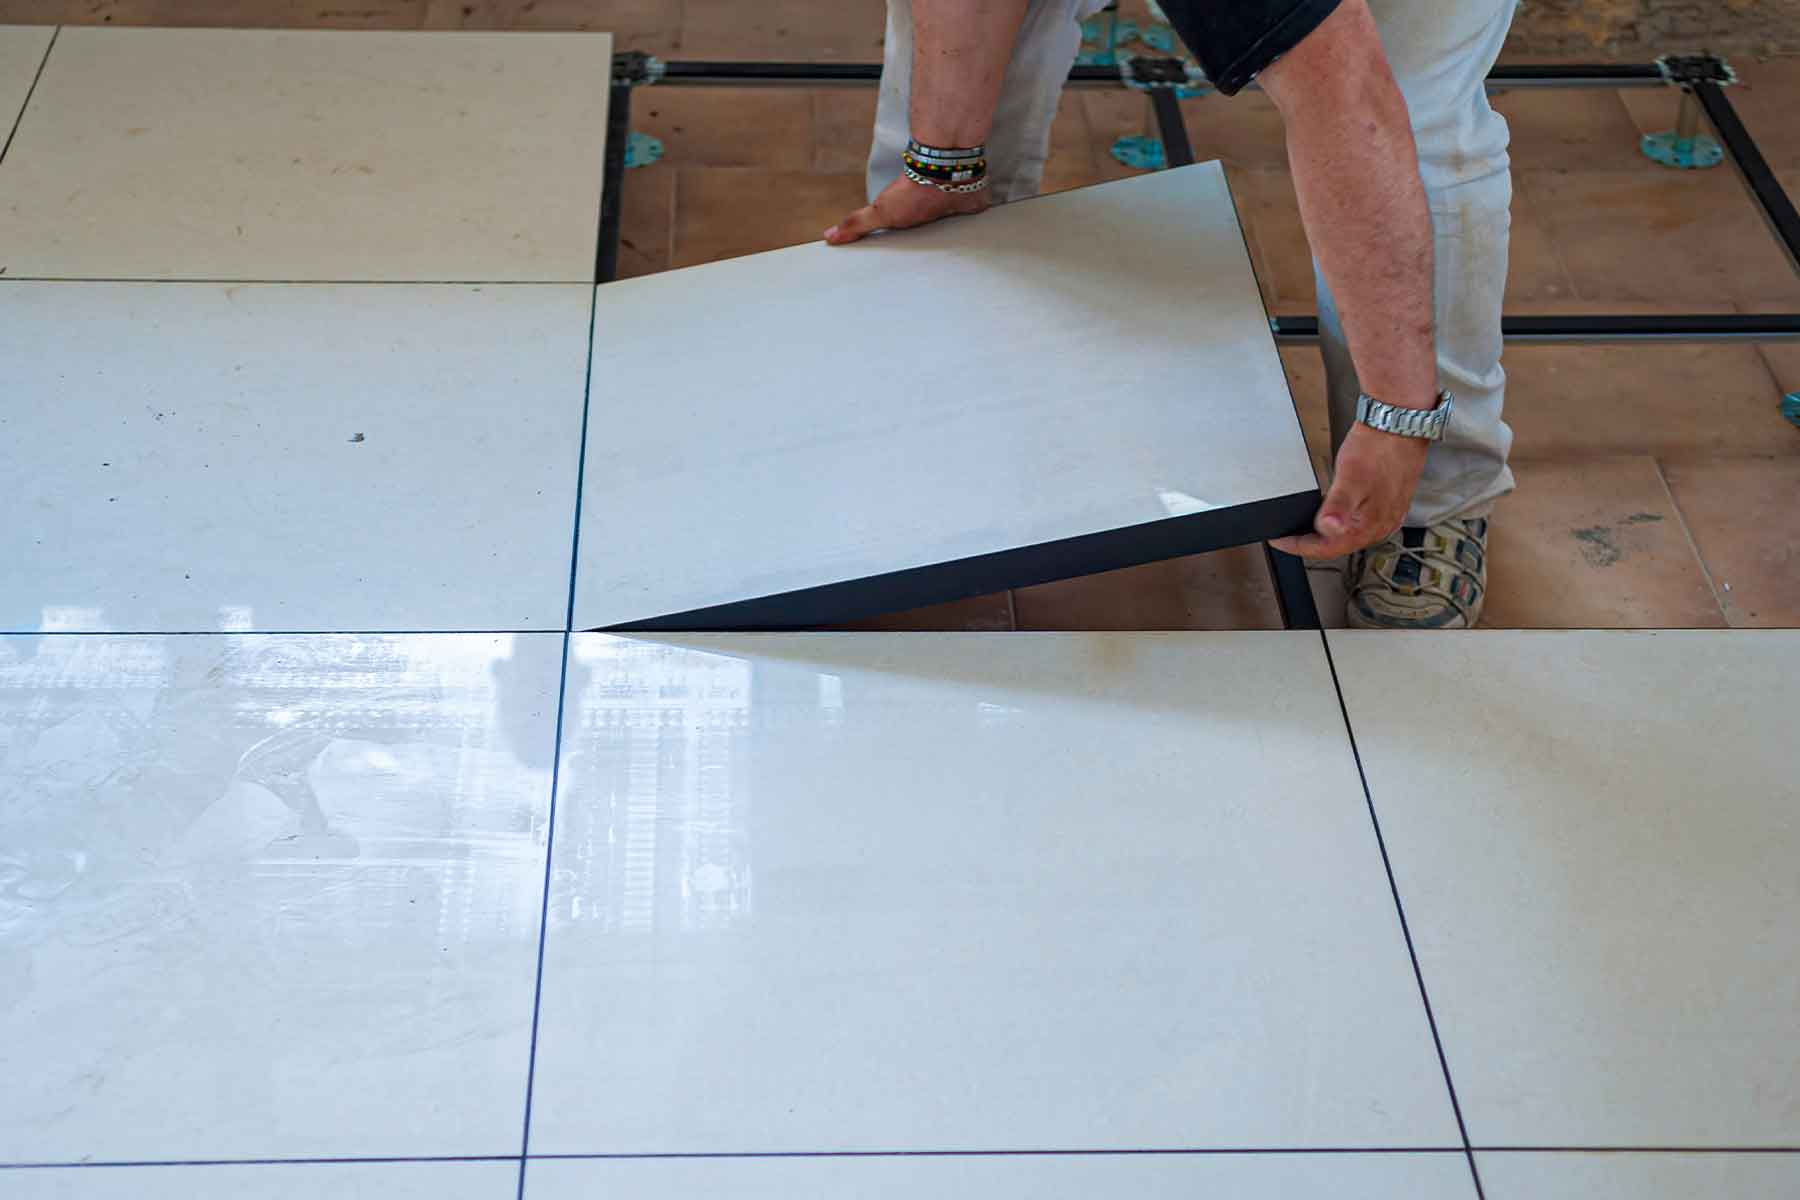 Construction worker removing used raised floor tiles